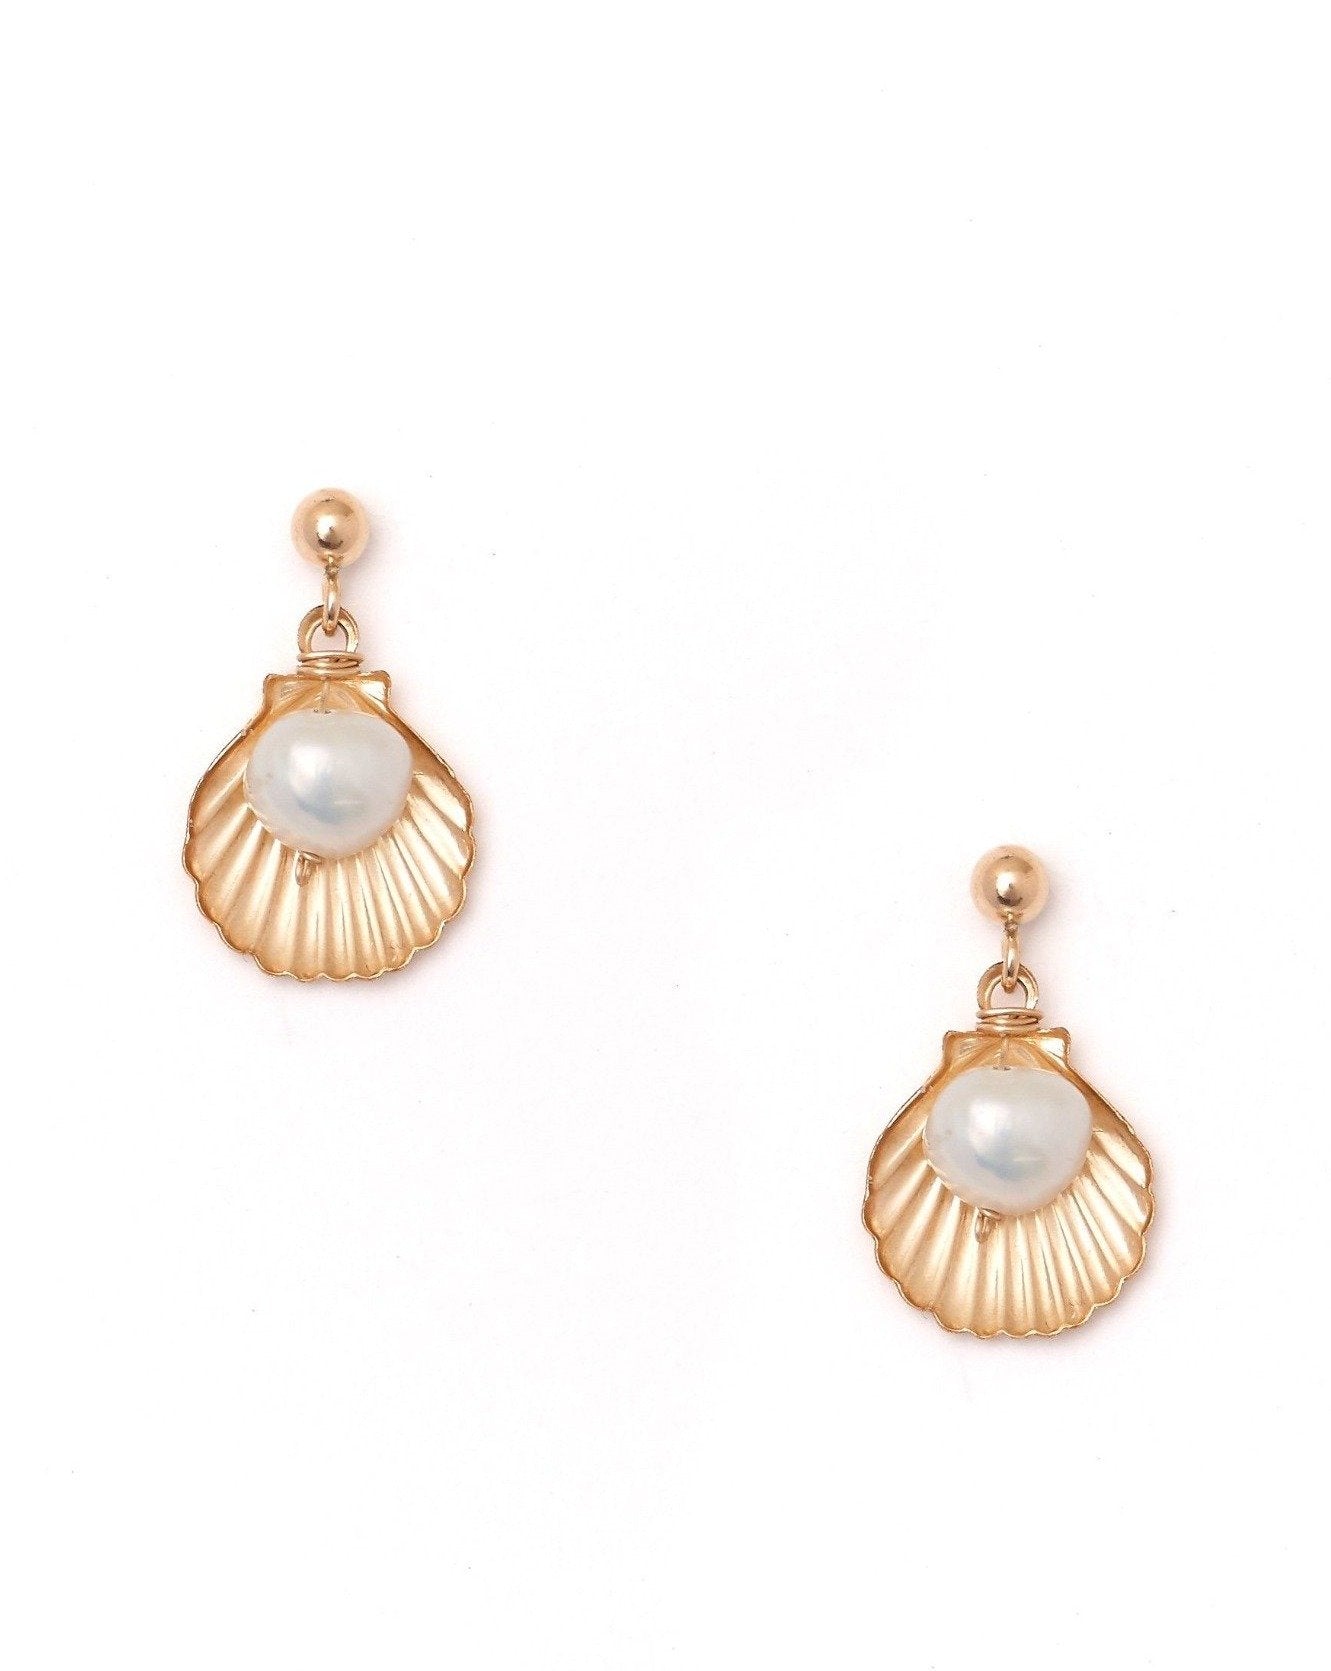 Belle Earrings by KOZAKH. Dangling earrings in 14K Gold Filled, featuring a 5mm flat irregular Pearl and a Shell charm.